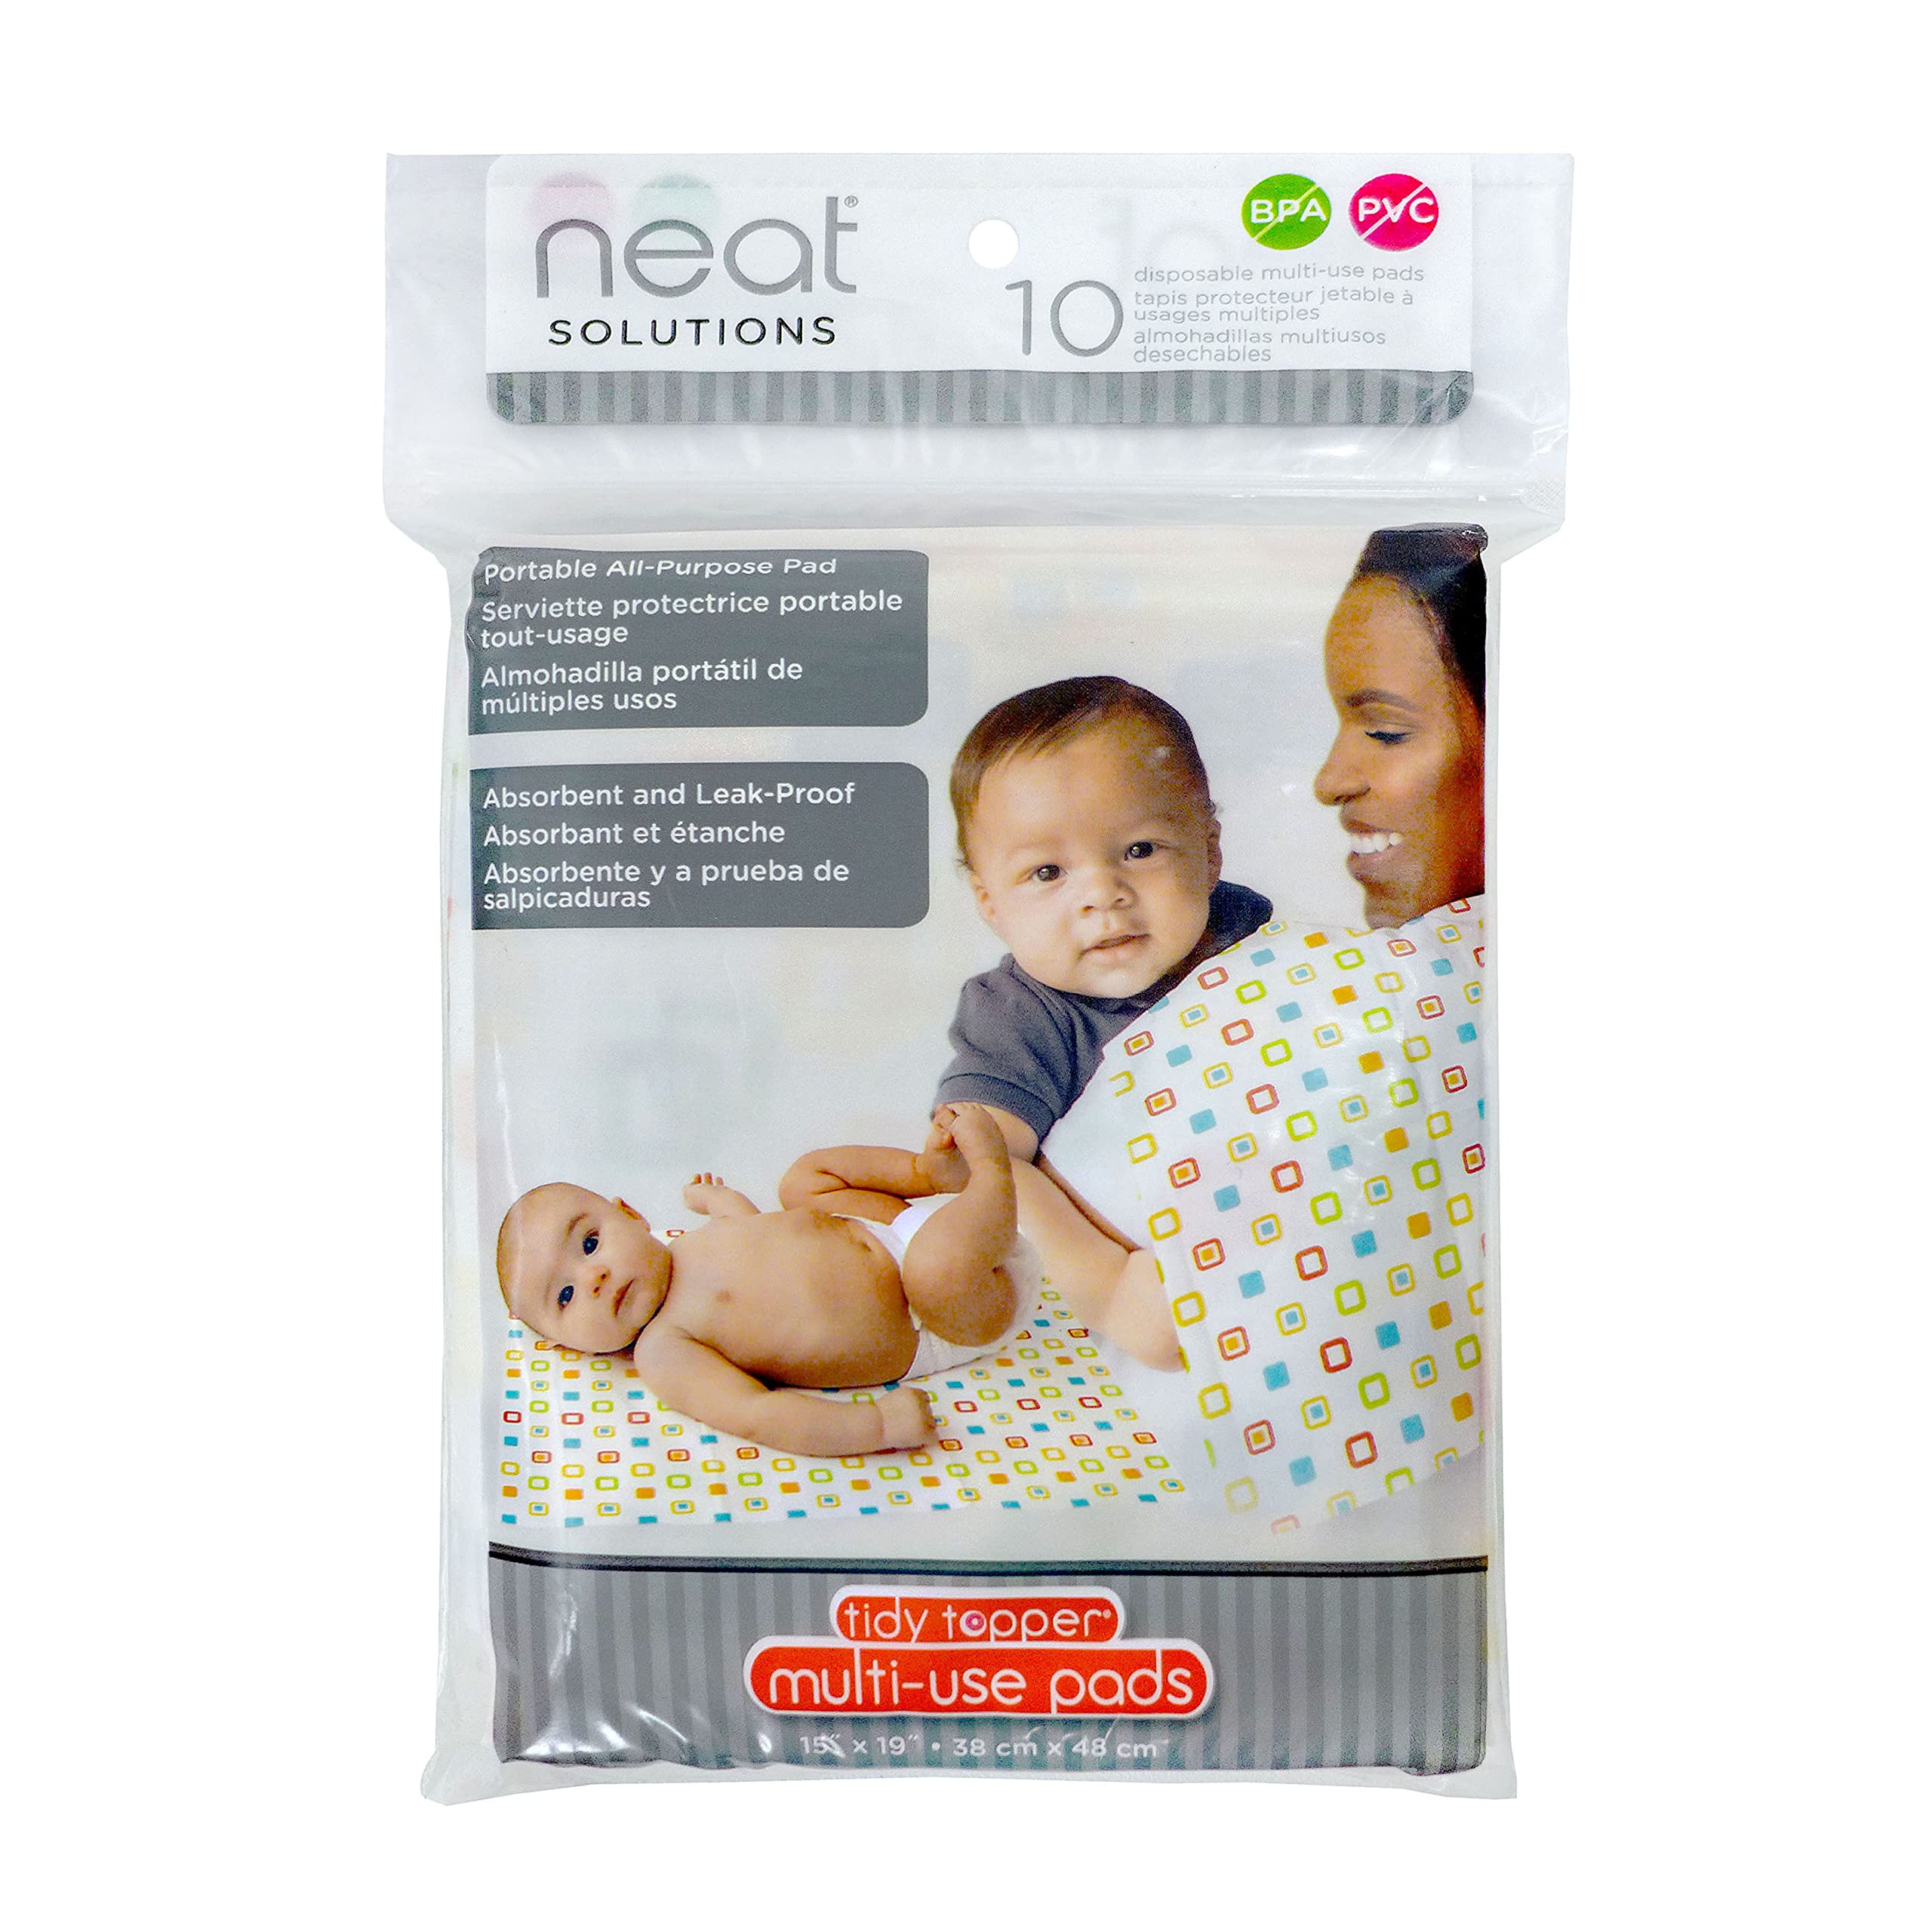 Neat Solutions Neat-Ware Tidy Topper Multi-Use Disposable Pads, 19 x 15,  10 Count